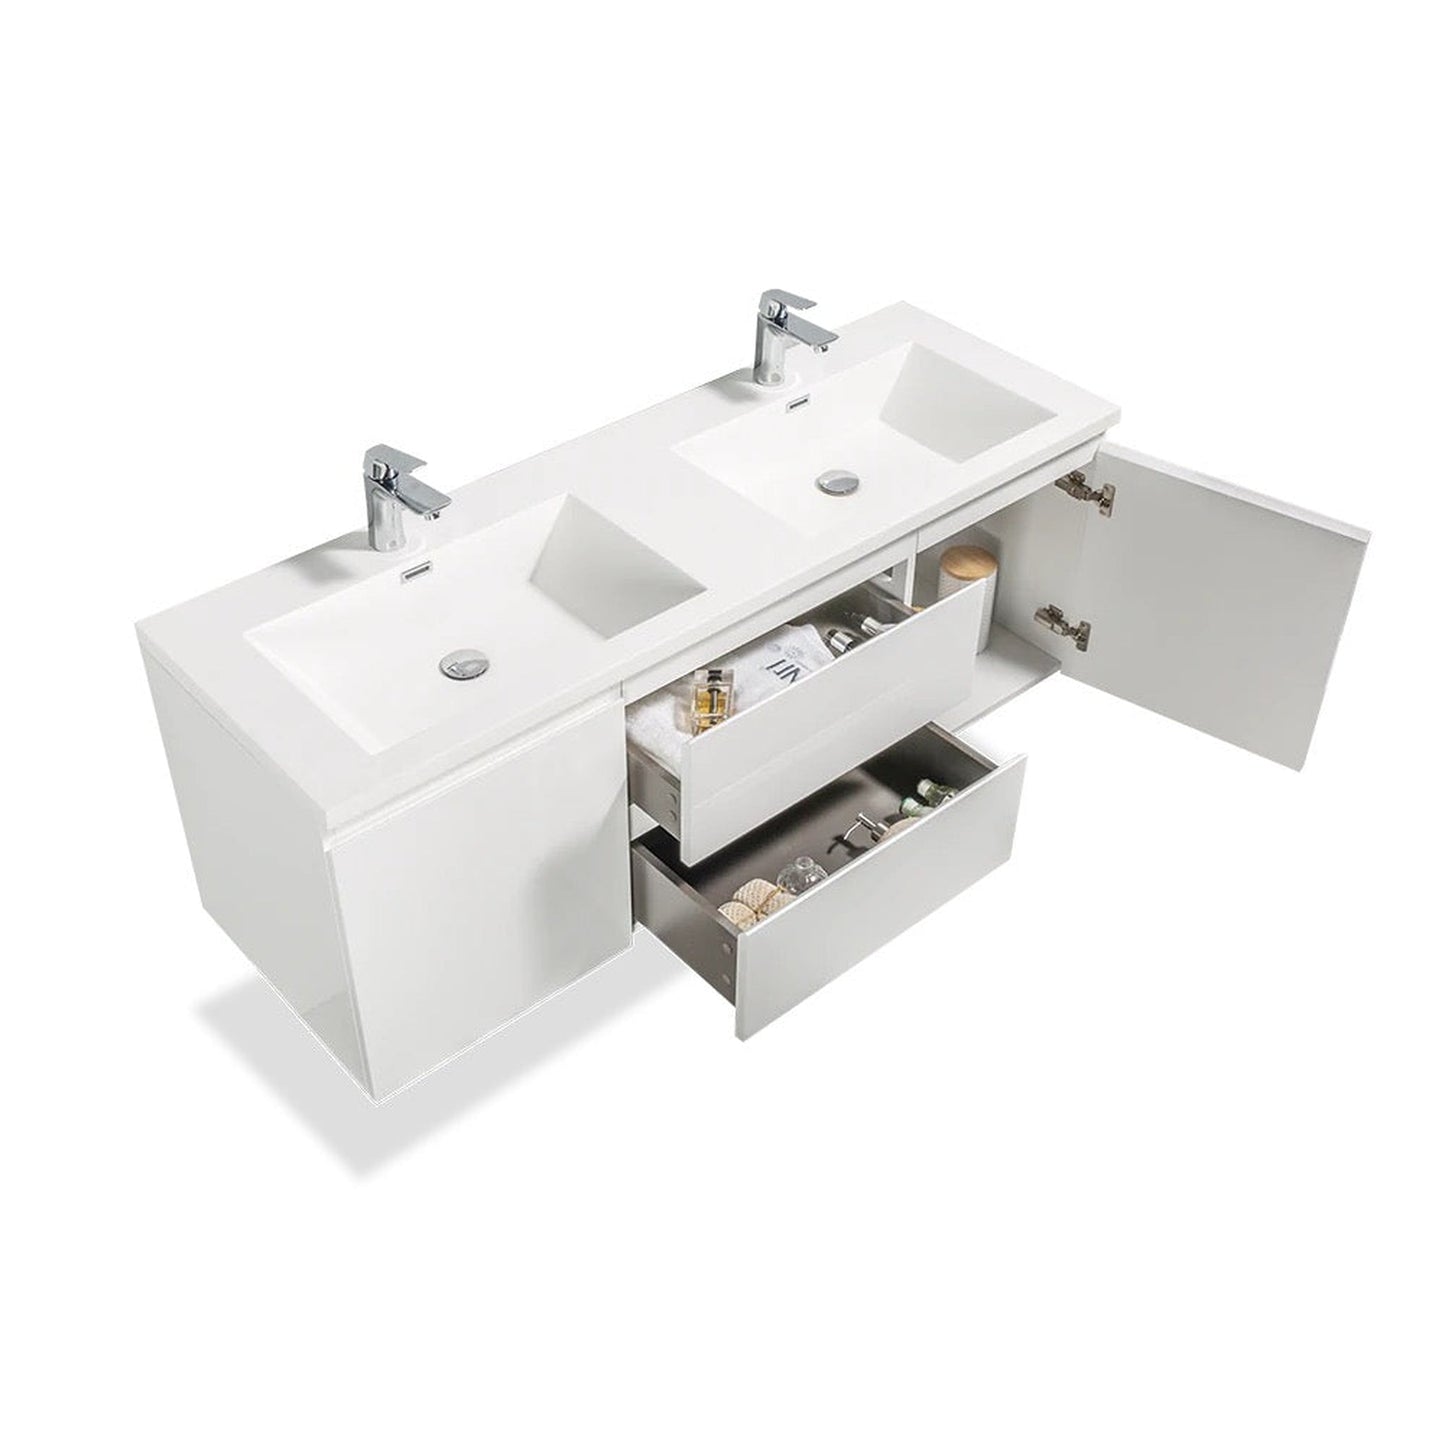 TONA Angela 60" White Wall-Mounted Bathroom Vanity With Faux Marble Integrated Top & Double Sink